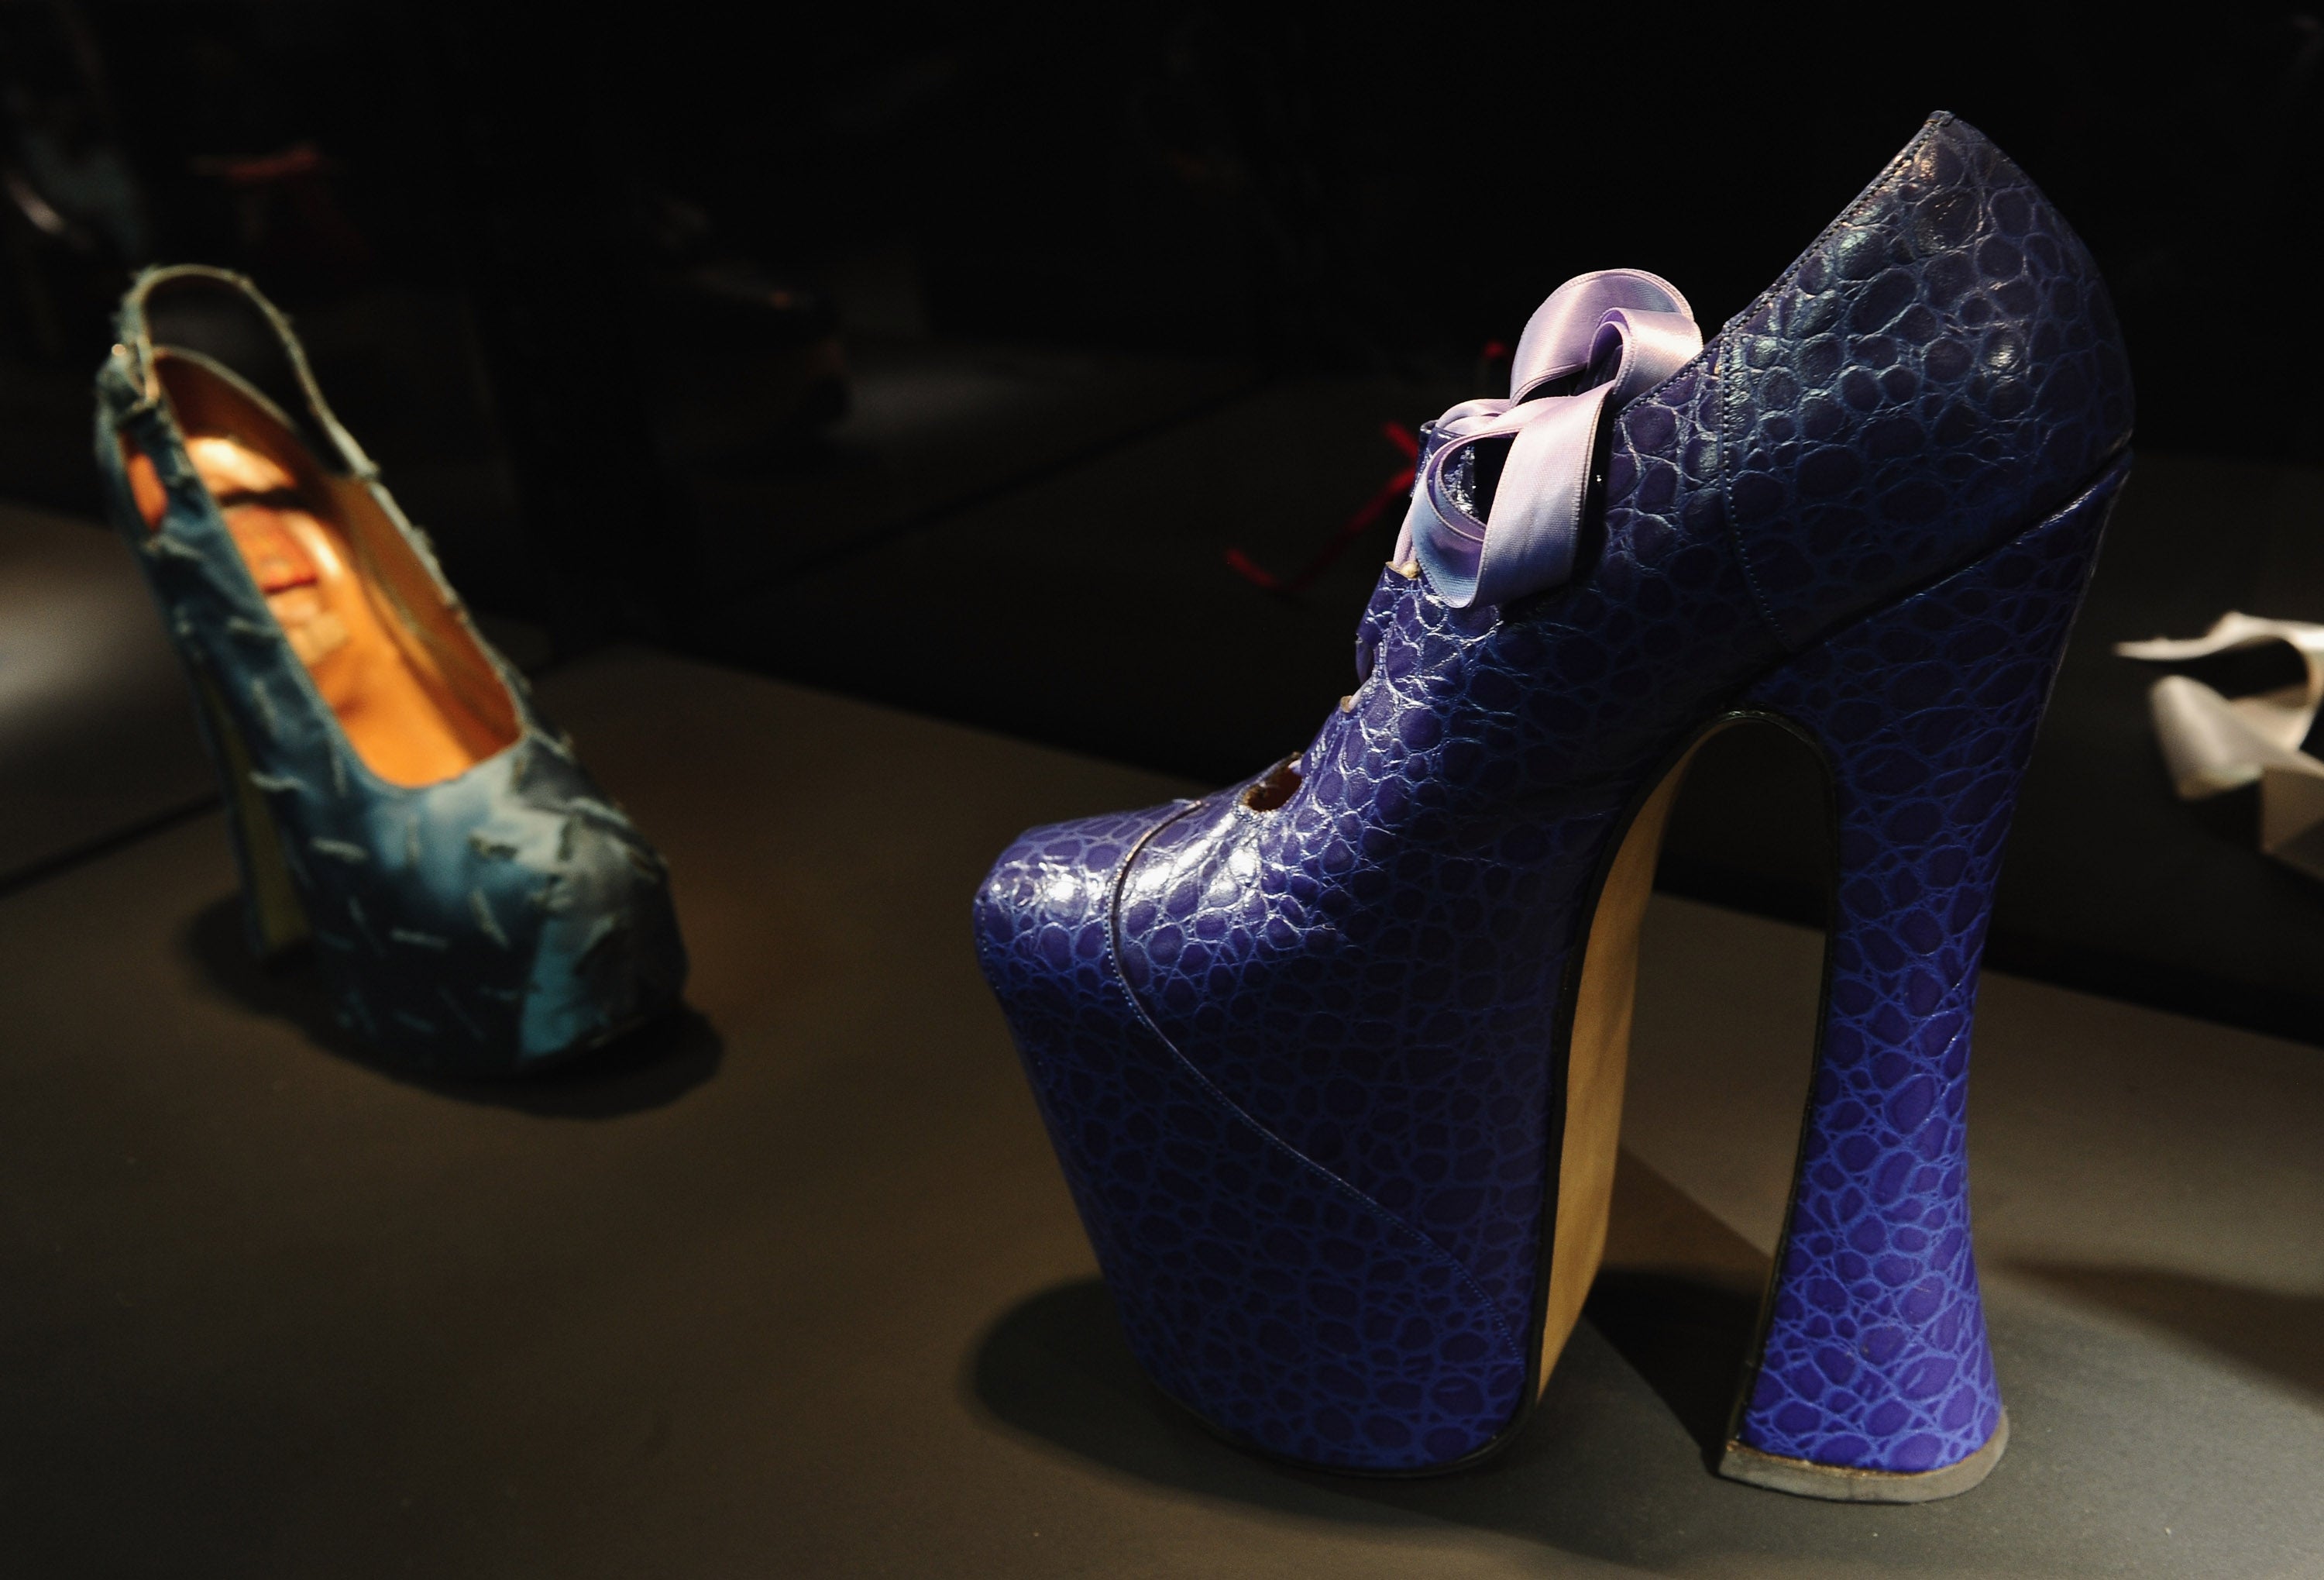 The platform heels Campbell wore during her infamous fall on the Vivienne Westwood runway